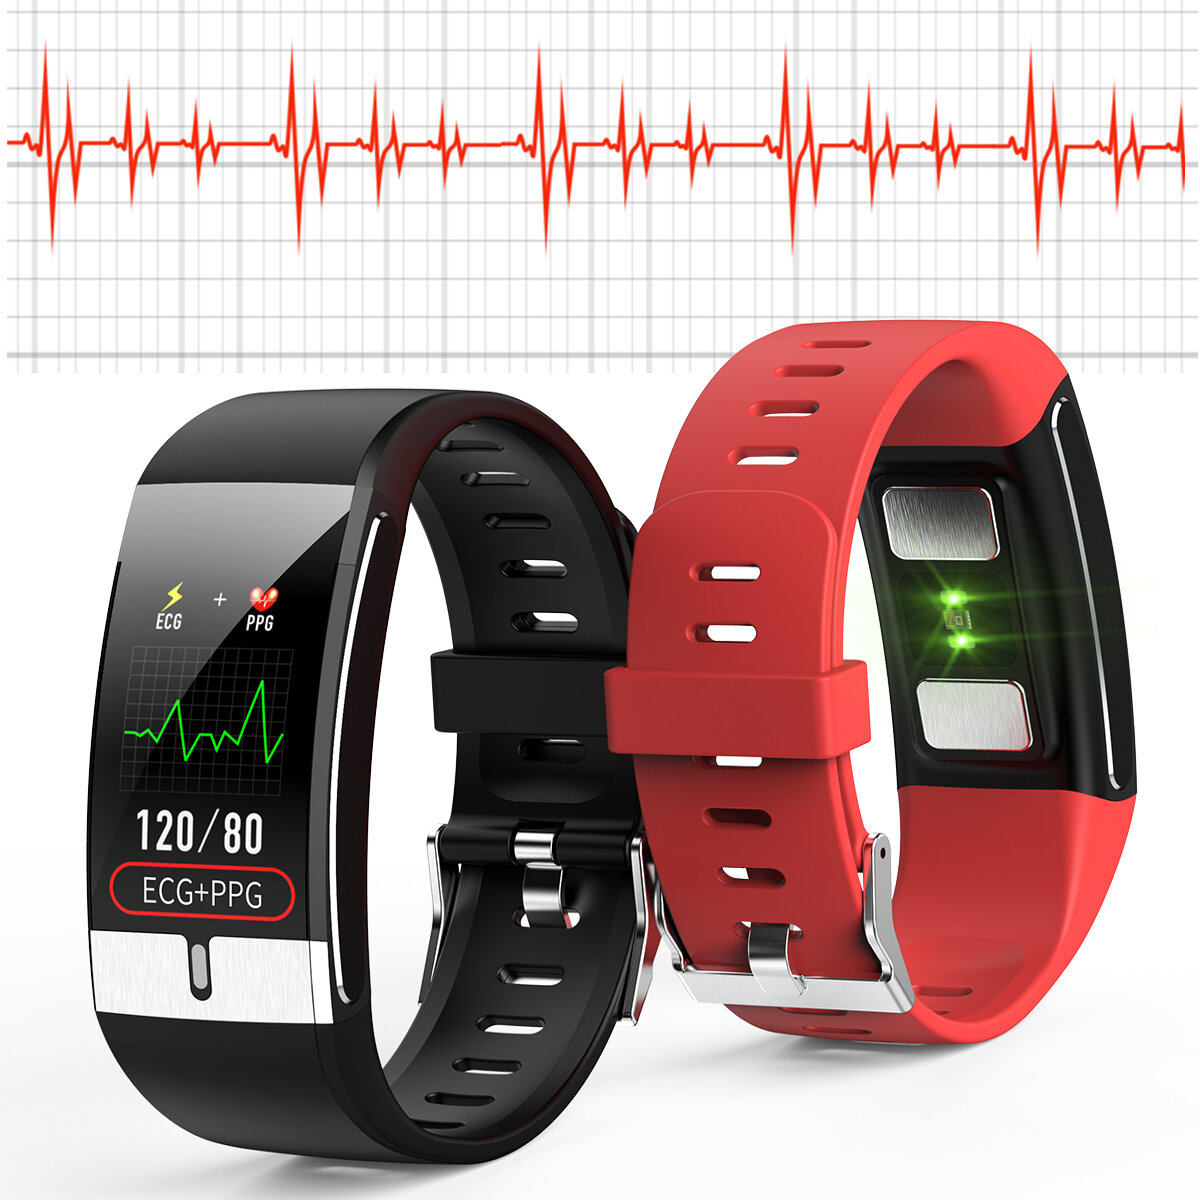 Image of [SPO2 Monitor]Bakeey E66 Thermometer ECG+PPG Heart Rate Blood Pressure Oxygen Monitor IP68 Waterproof USB Charging Smart